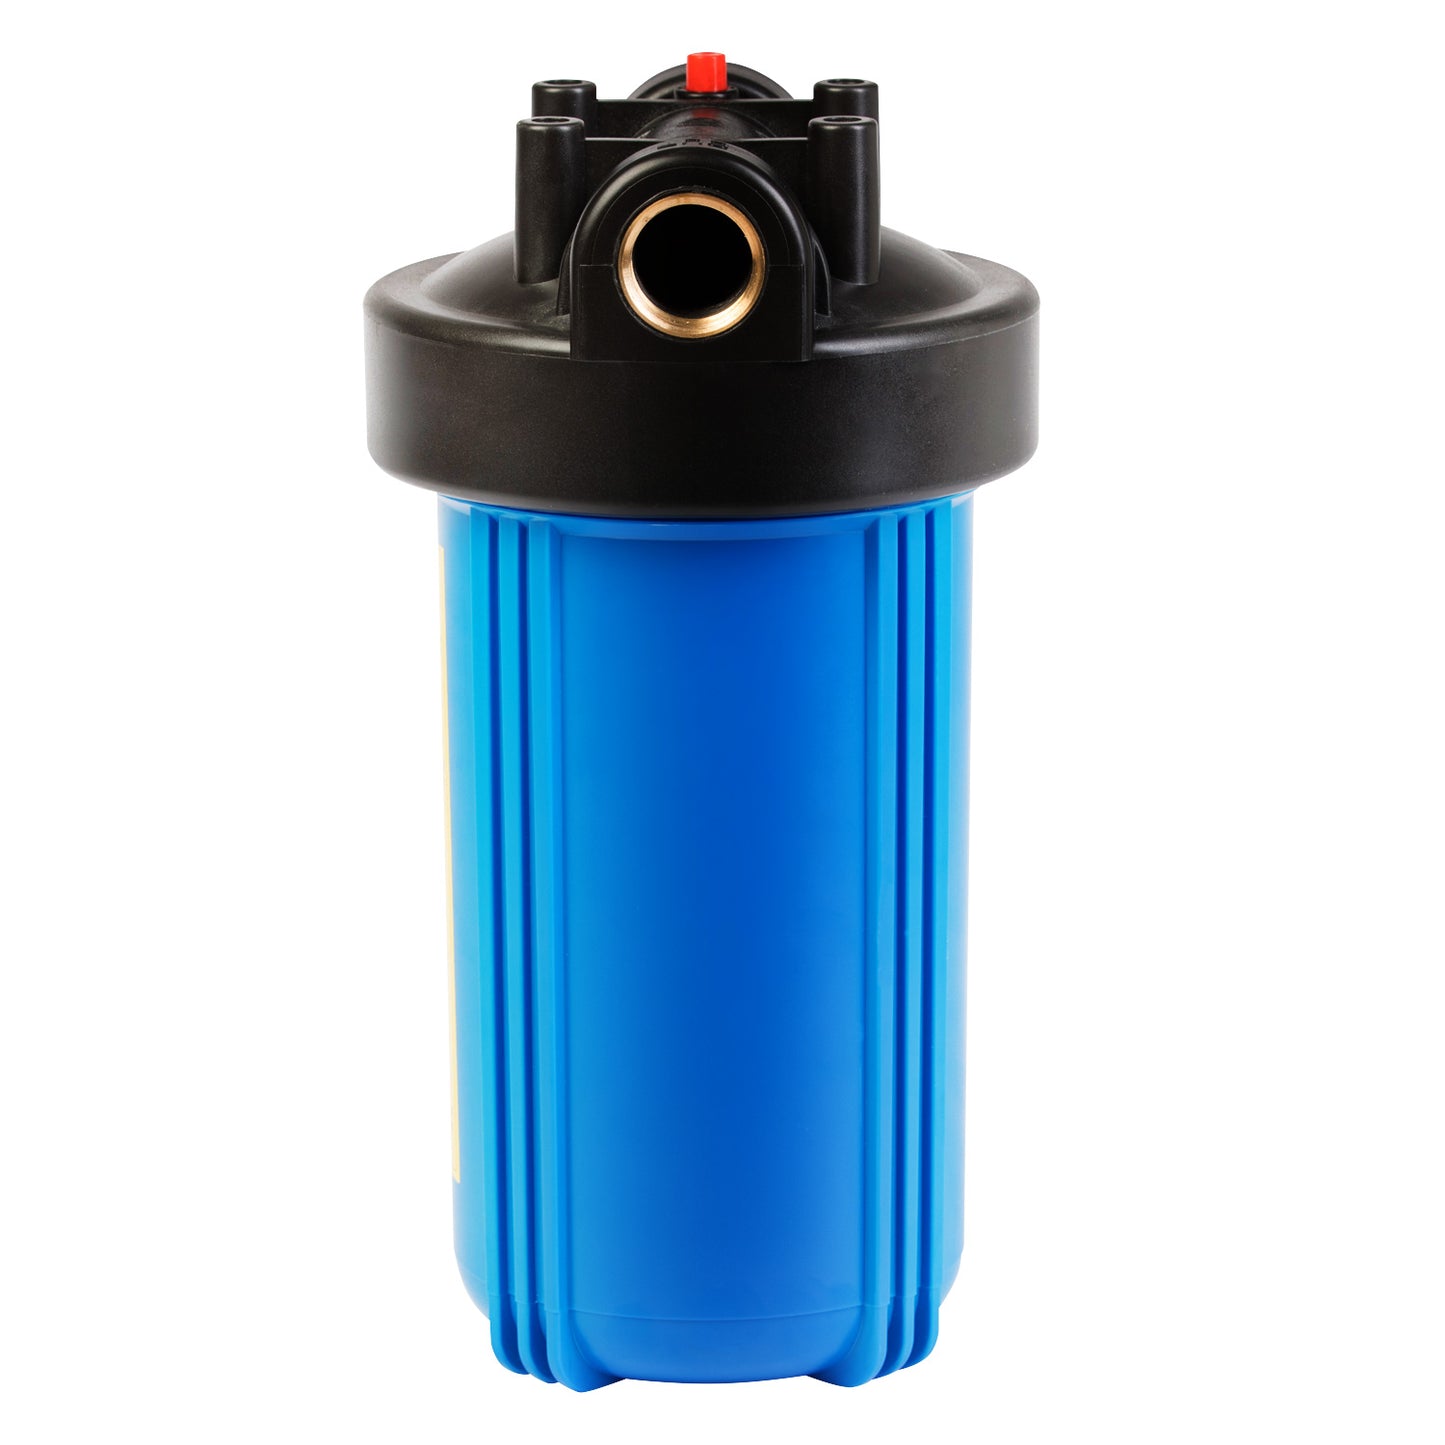 10 Inch Whole House Water Filter Housing-Fit for 4.5 "x10" Filters-Blue Color